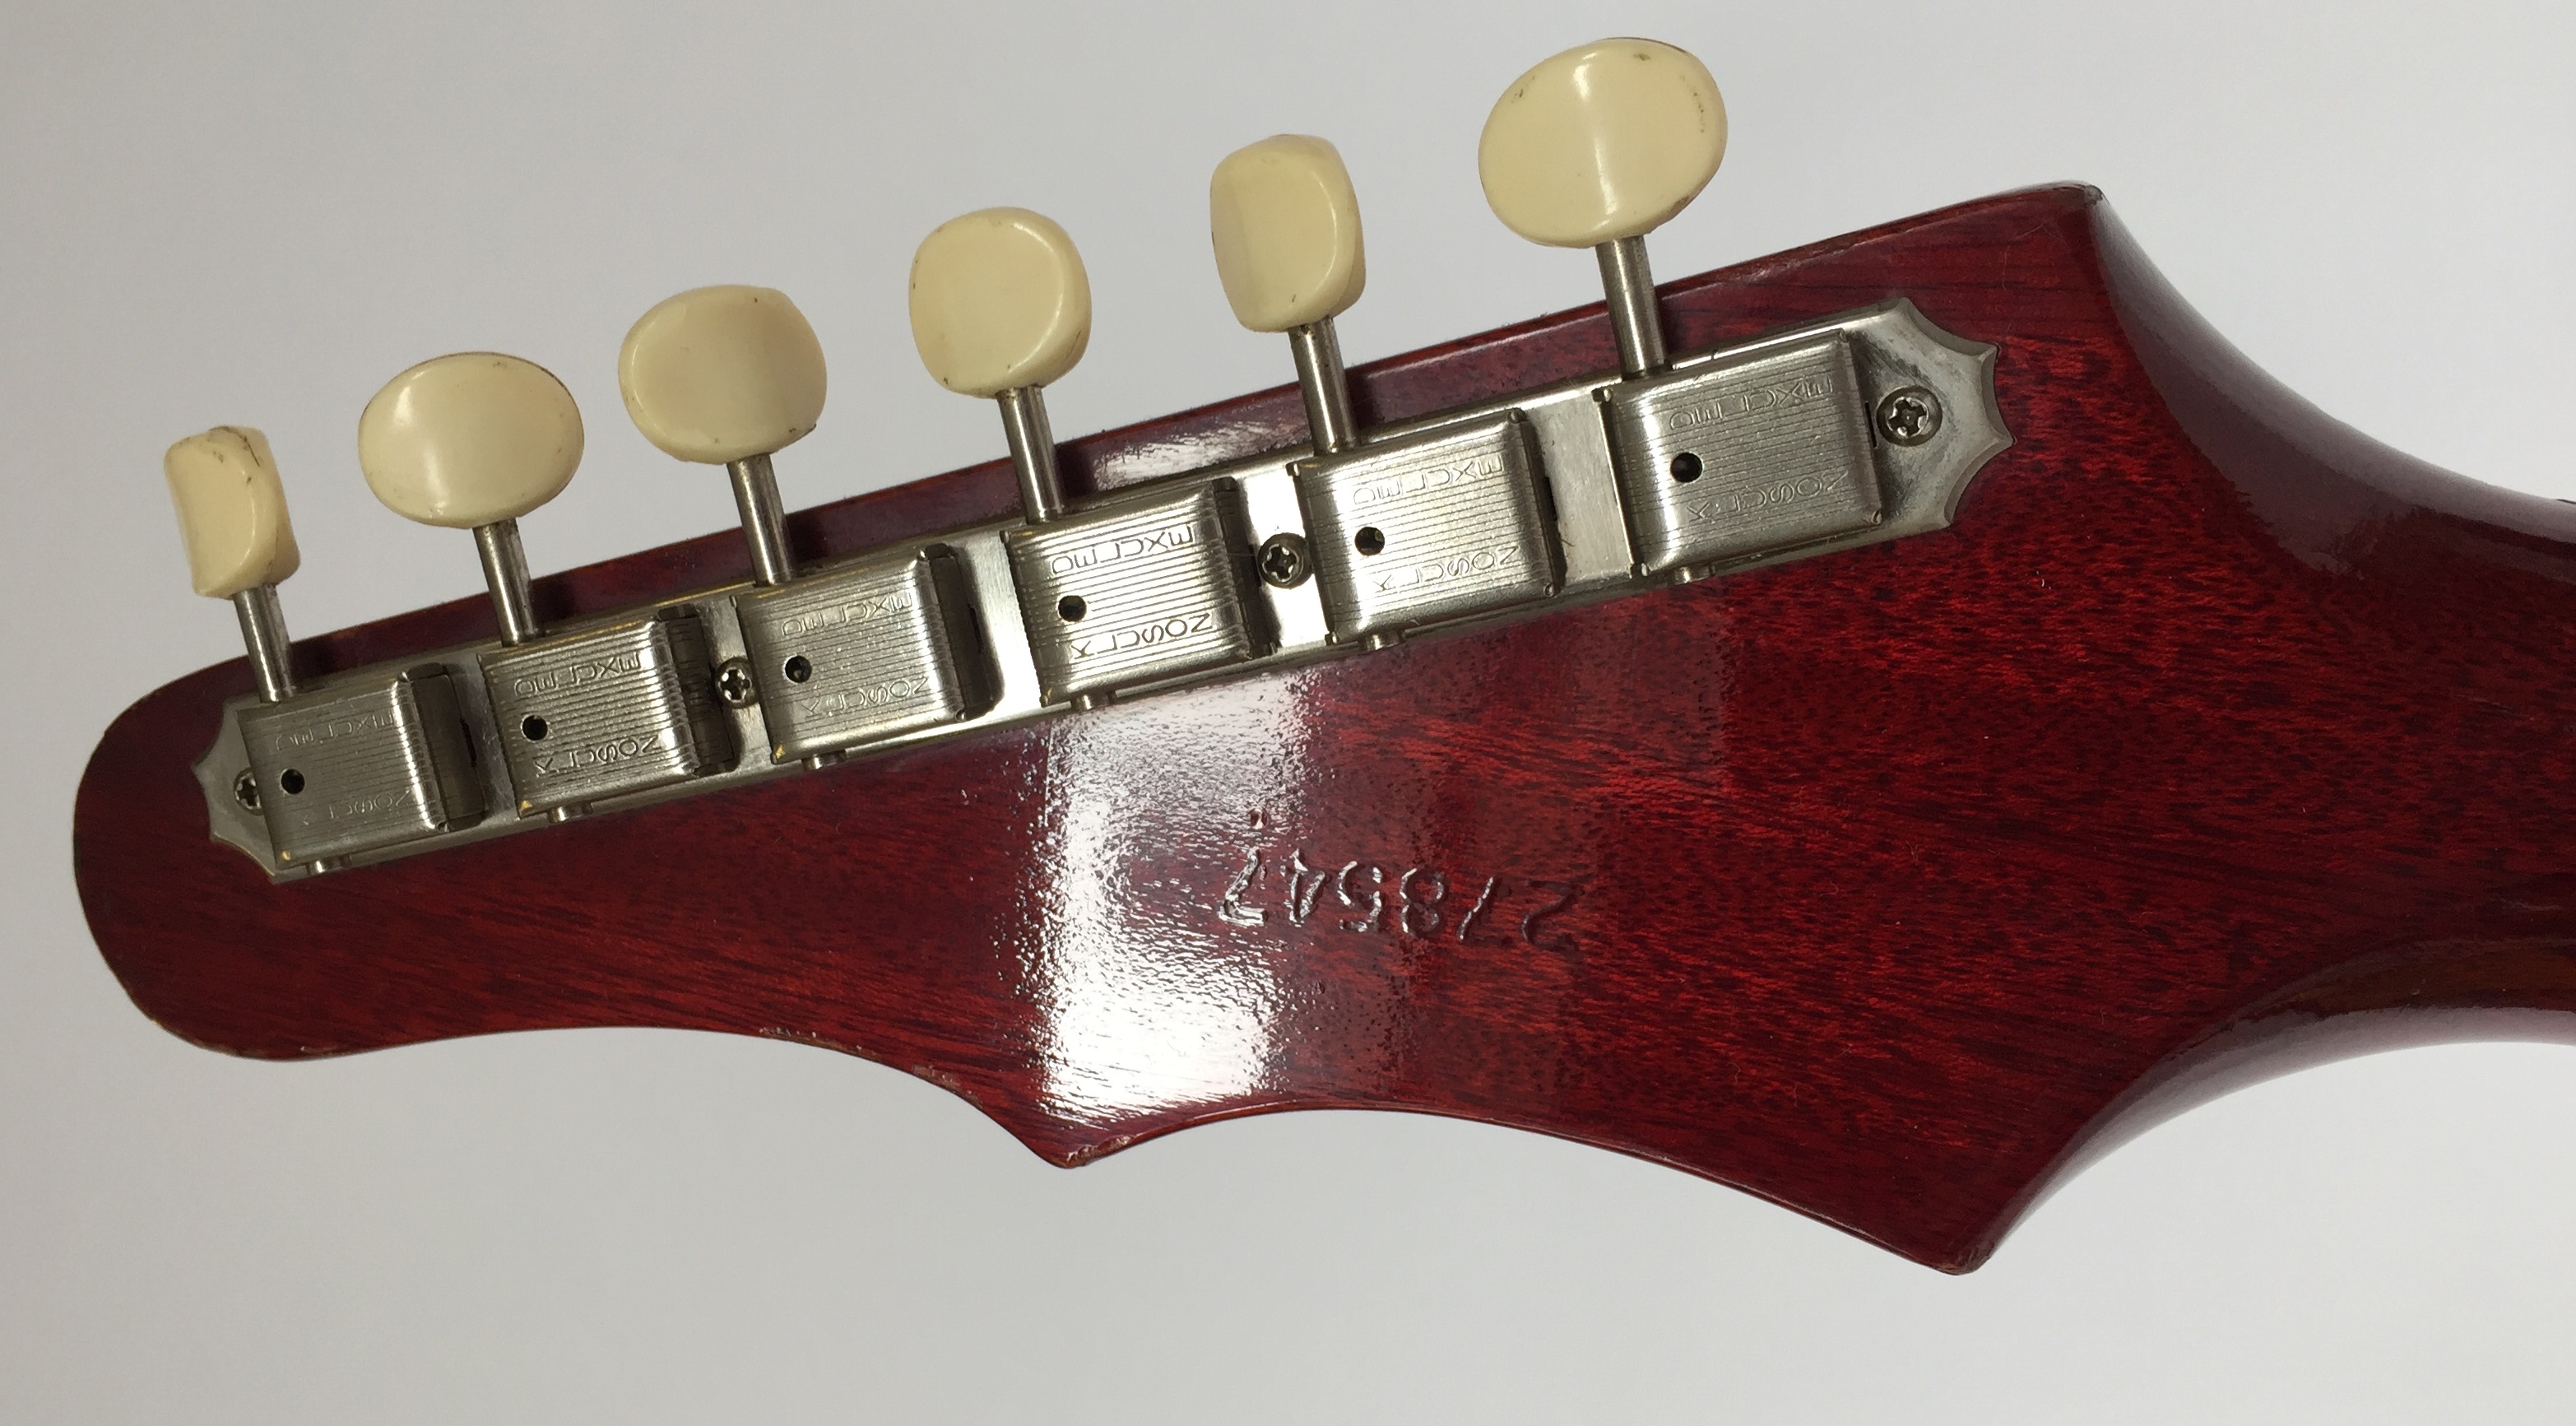 DWIGHT CORONET 1965 ELECTRIC GUITAR ***TEMPORARILY WITHDRAWN UNTIL RECEIPT OF CITES ARTICLE 10 - Image 4 of 7